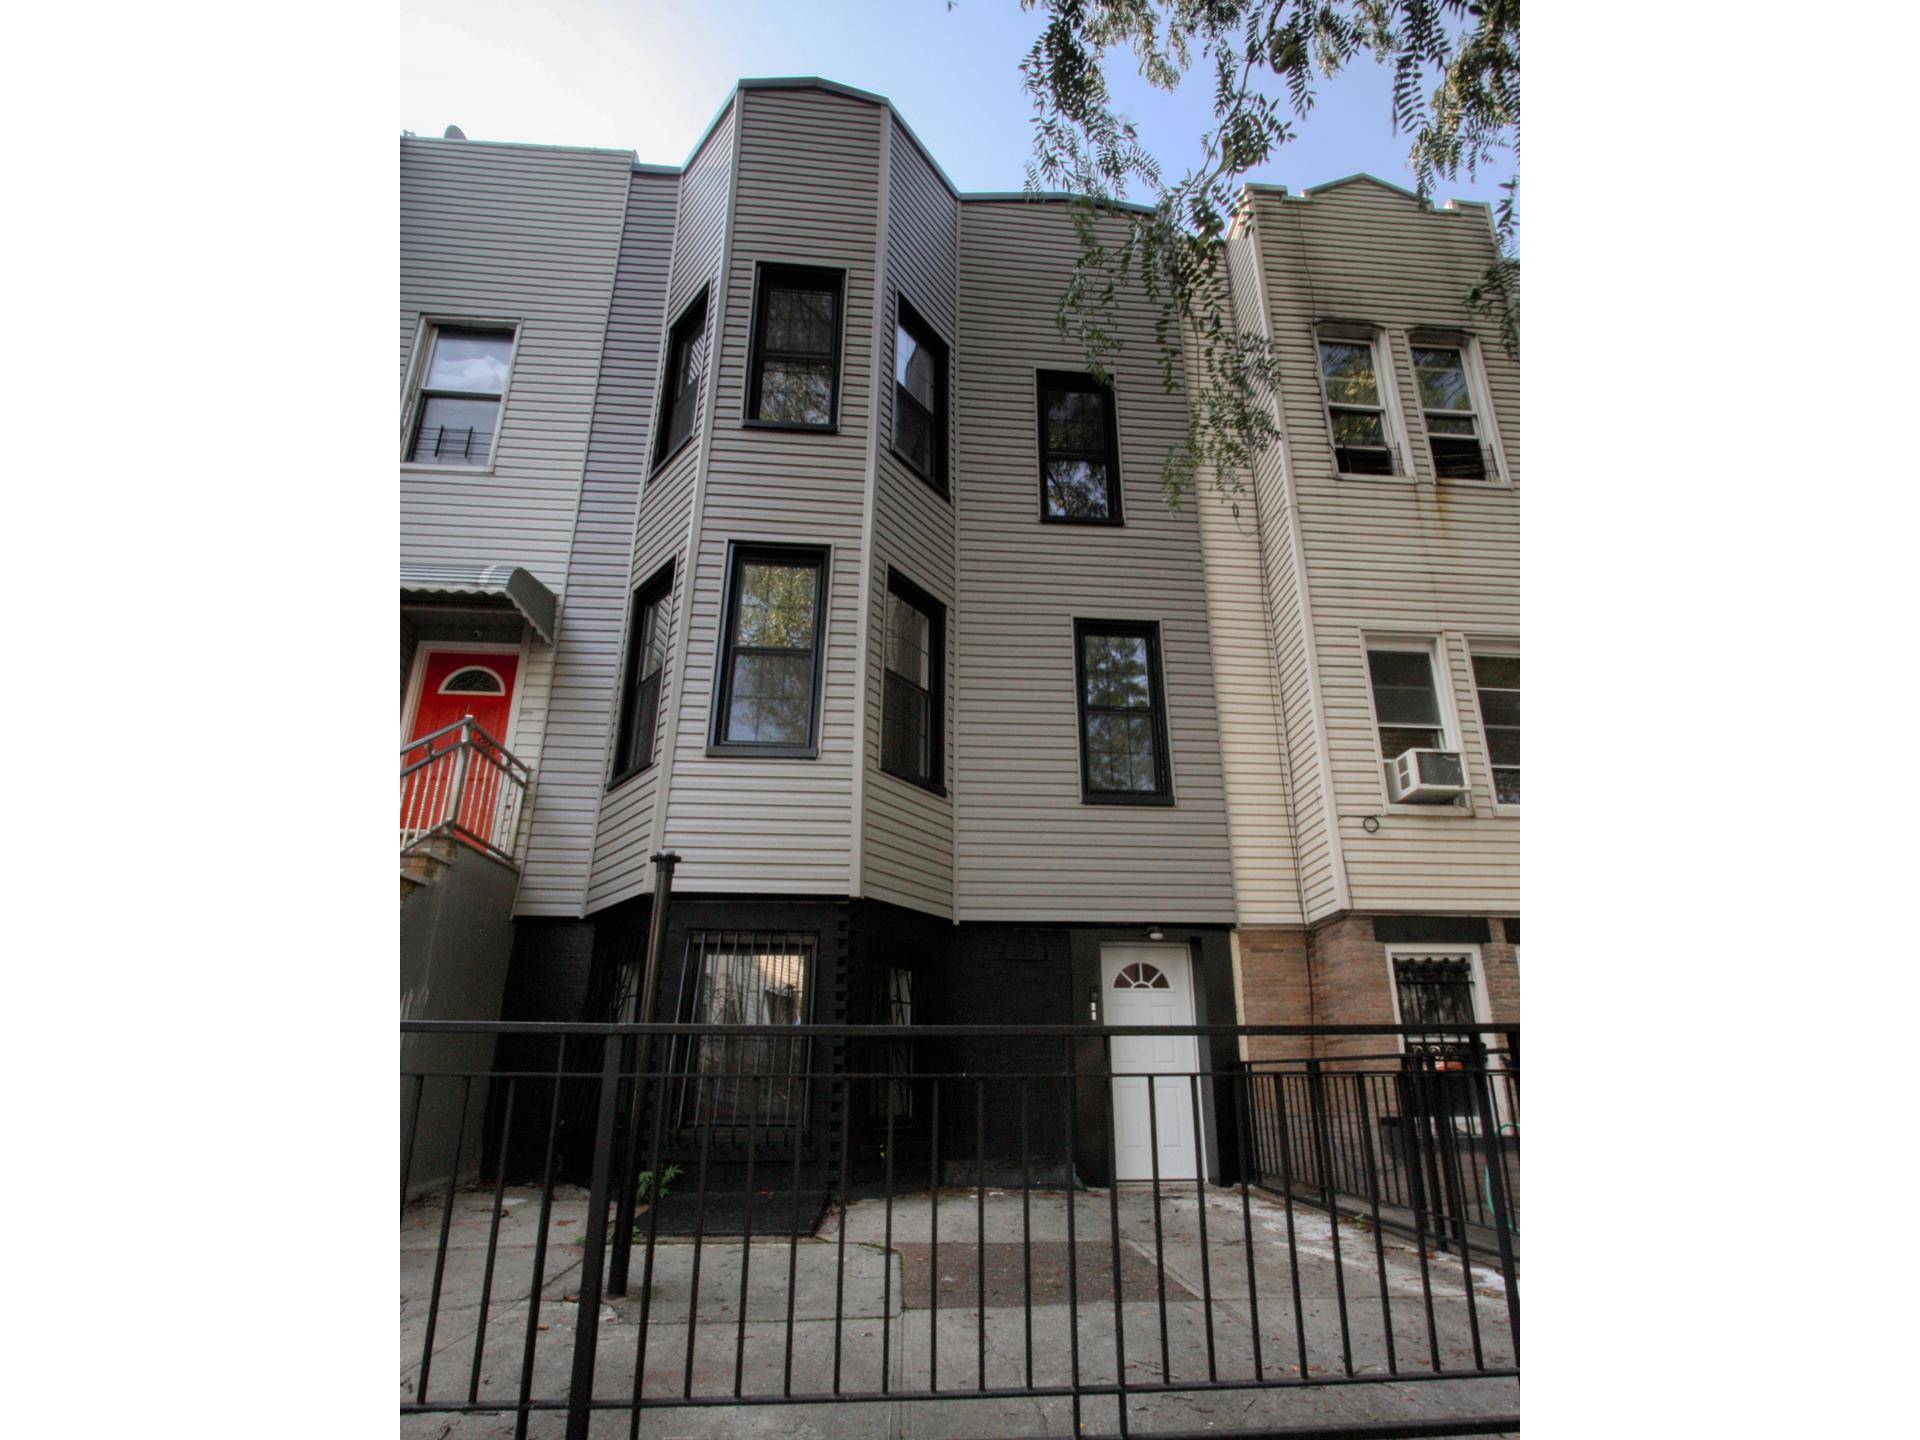 Introducing 147 Cornelia Street, a modern two family townhouse located on a gorgeous tree lined block in Bushwick, nestled between Evergreen and Central Avenue.